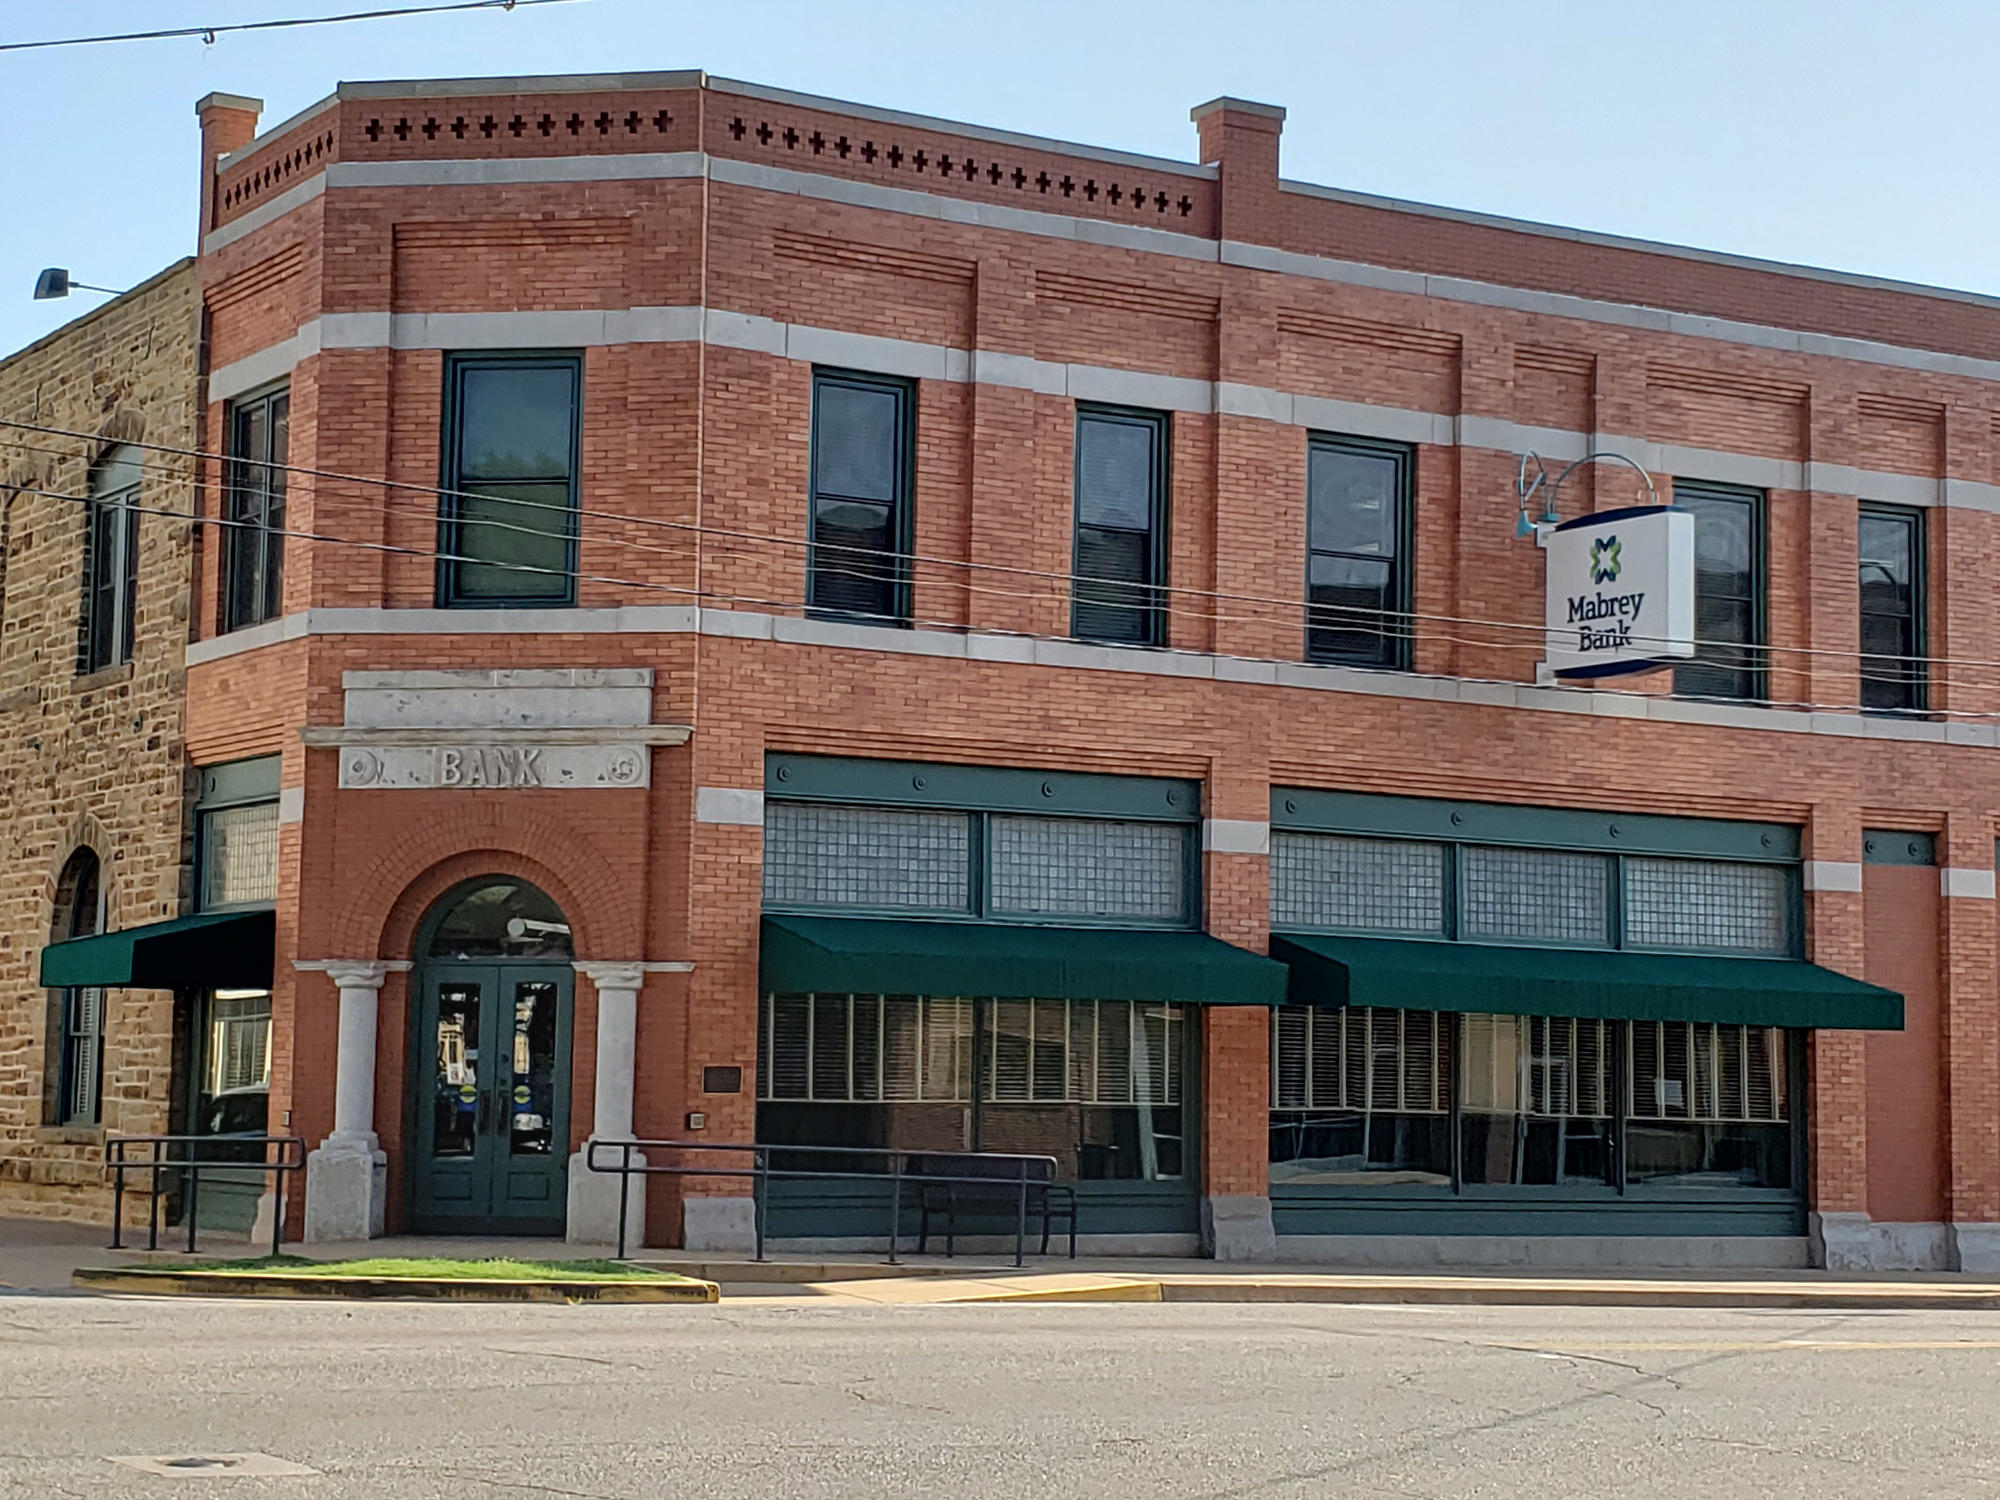 The Mabrey family has been involved with banking in Okmulgee since the early 1900s.  This historic location in downtown Okmulgee, contains artifacts and displays from the early days of banking and is staffed by local professionals with unmatched expertise in Okmulgee and surrounding areas.